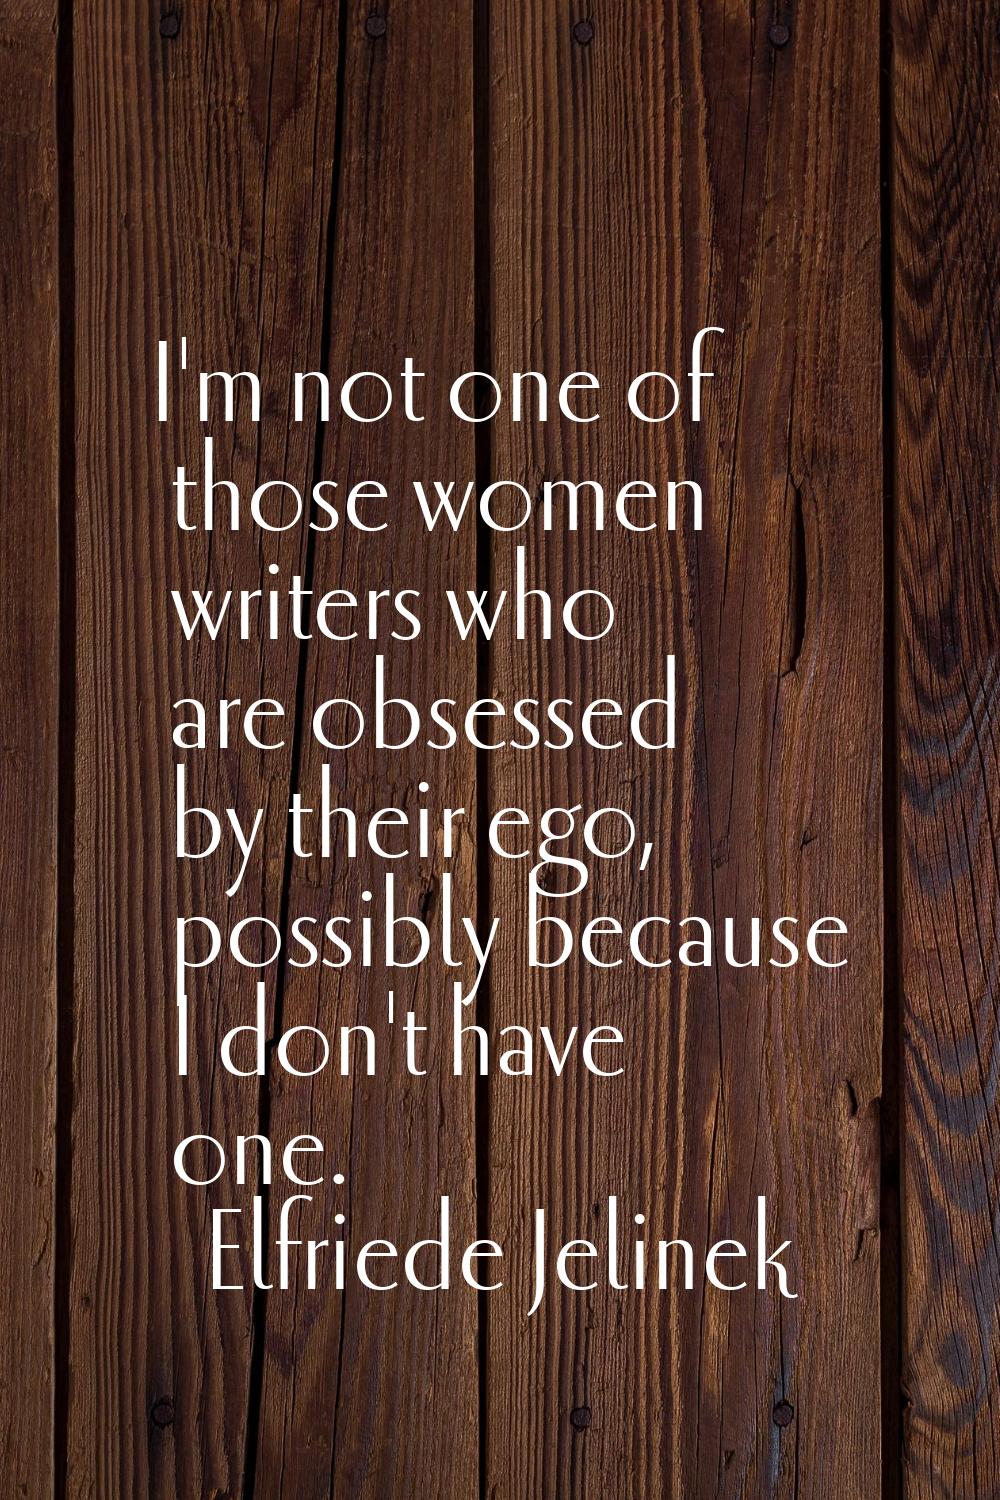 I'm not one of those women writers who are obsessed by their ego, possibly because I don't have one